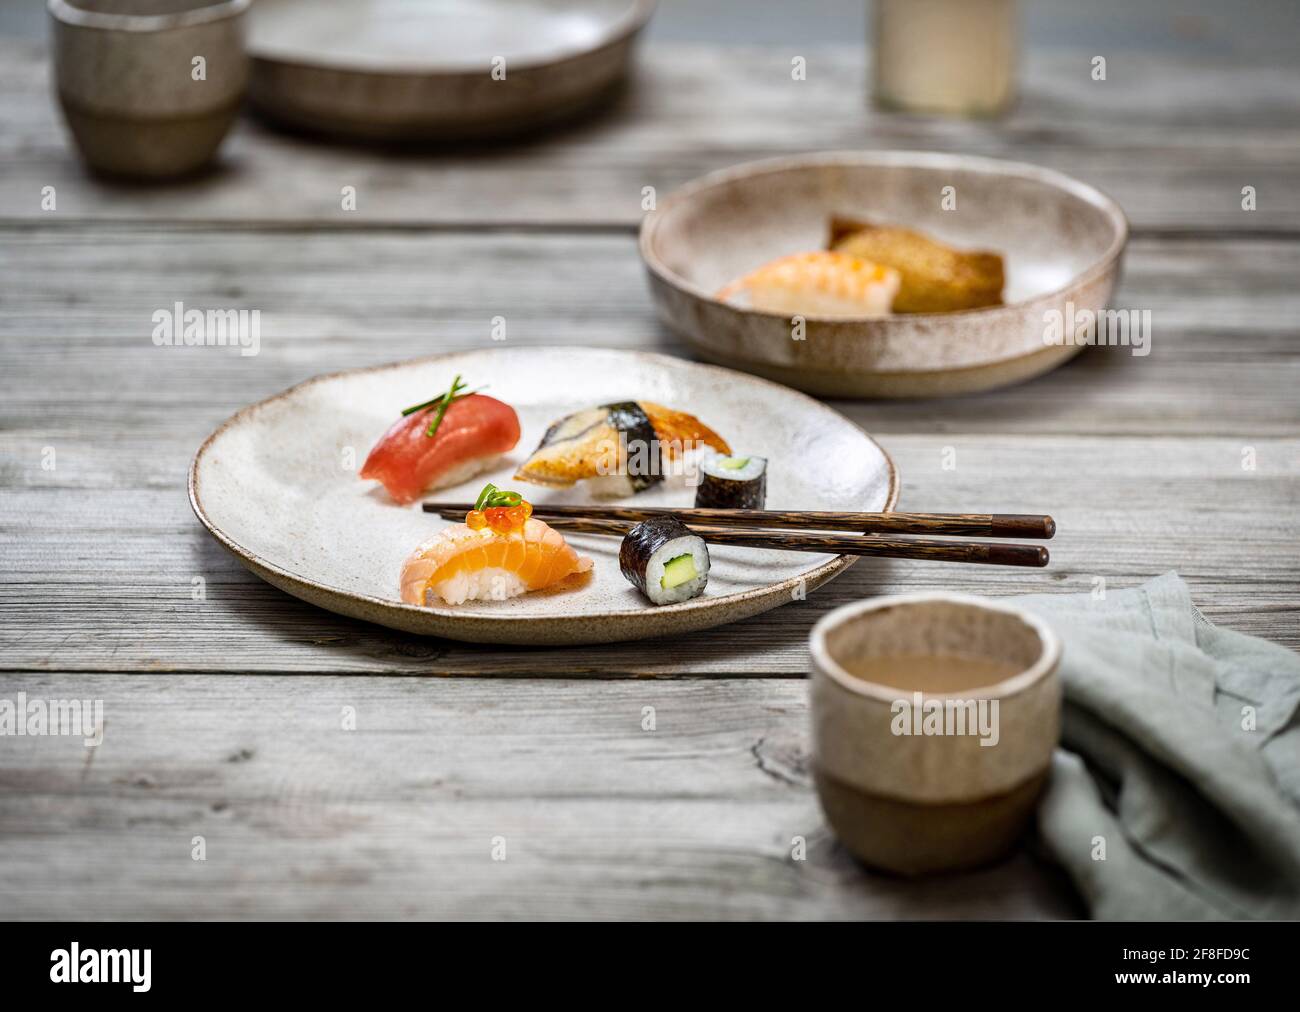 Food photo with sushi maki and nigiri on light ceramic plate arranged on a rough gray wooden table. Stock Photo